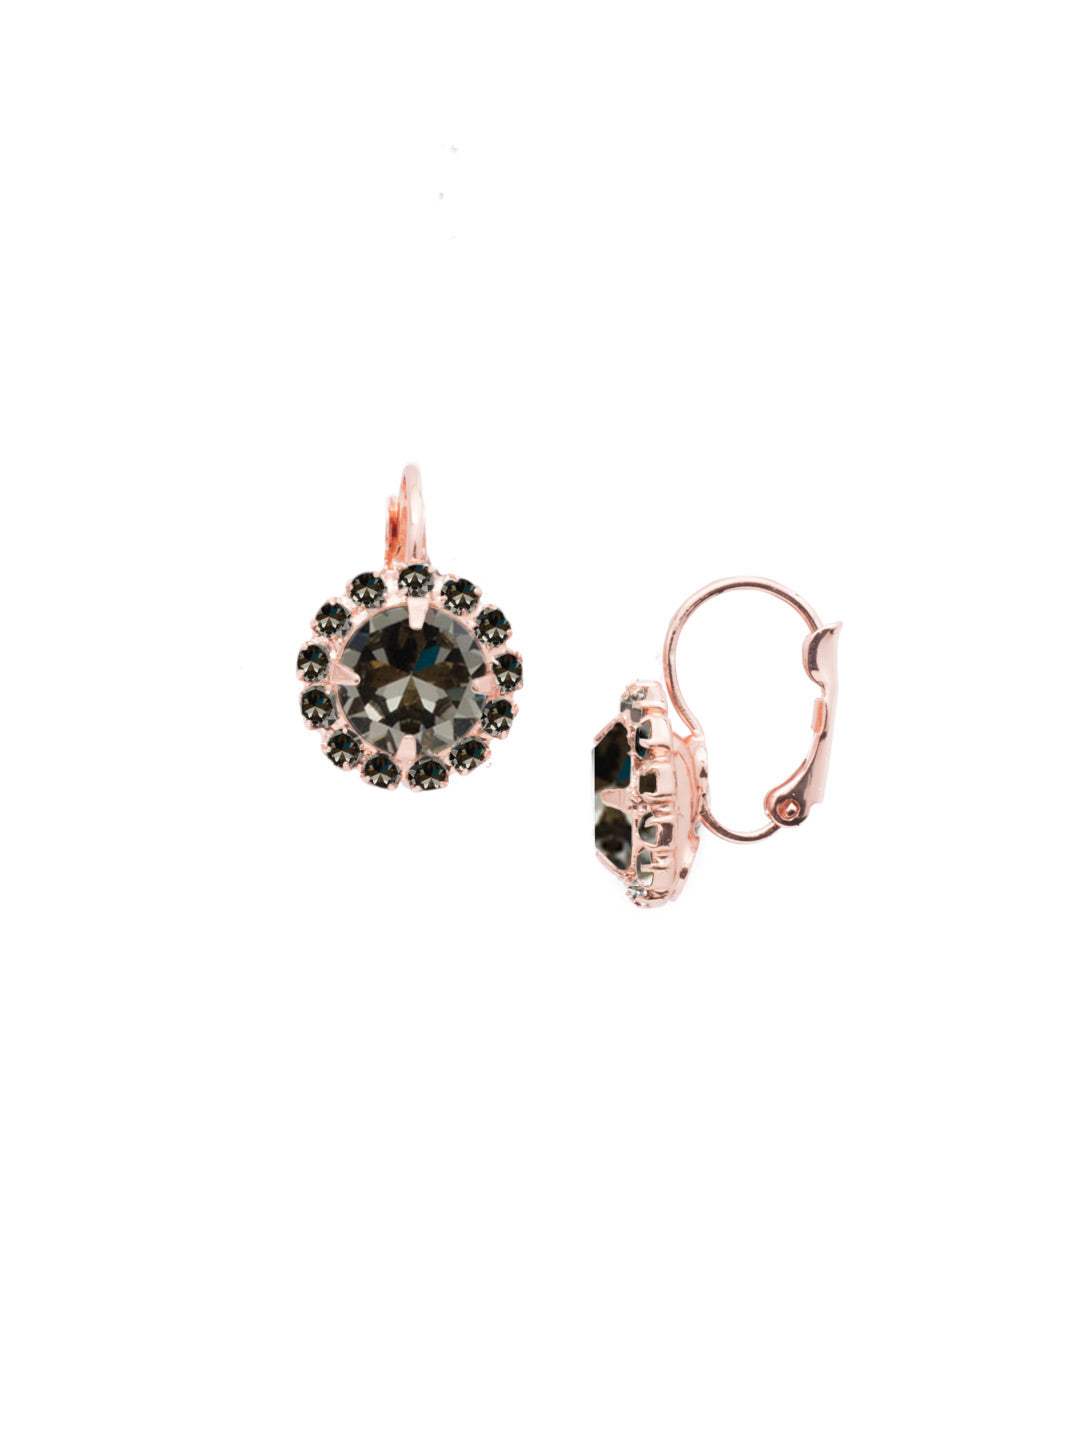 Haute Halo Dangle Earrings - EDL10RGBD - <p>A central round crystal with an elegant halo of gems embodies elegance and style. From Sorrelli's Black Diamond collection in our Rose Gold-tone finish.</p>